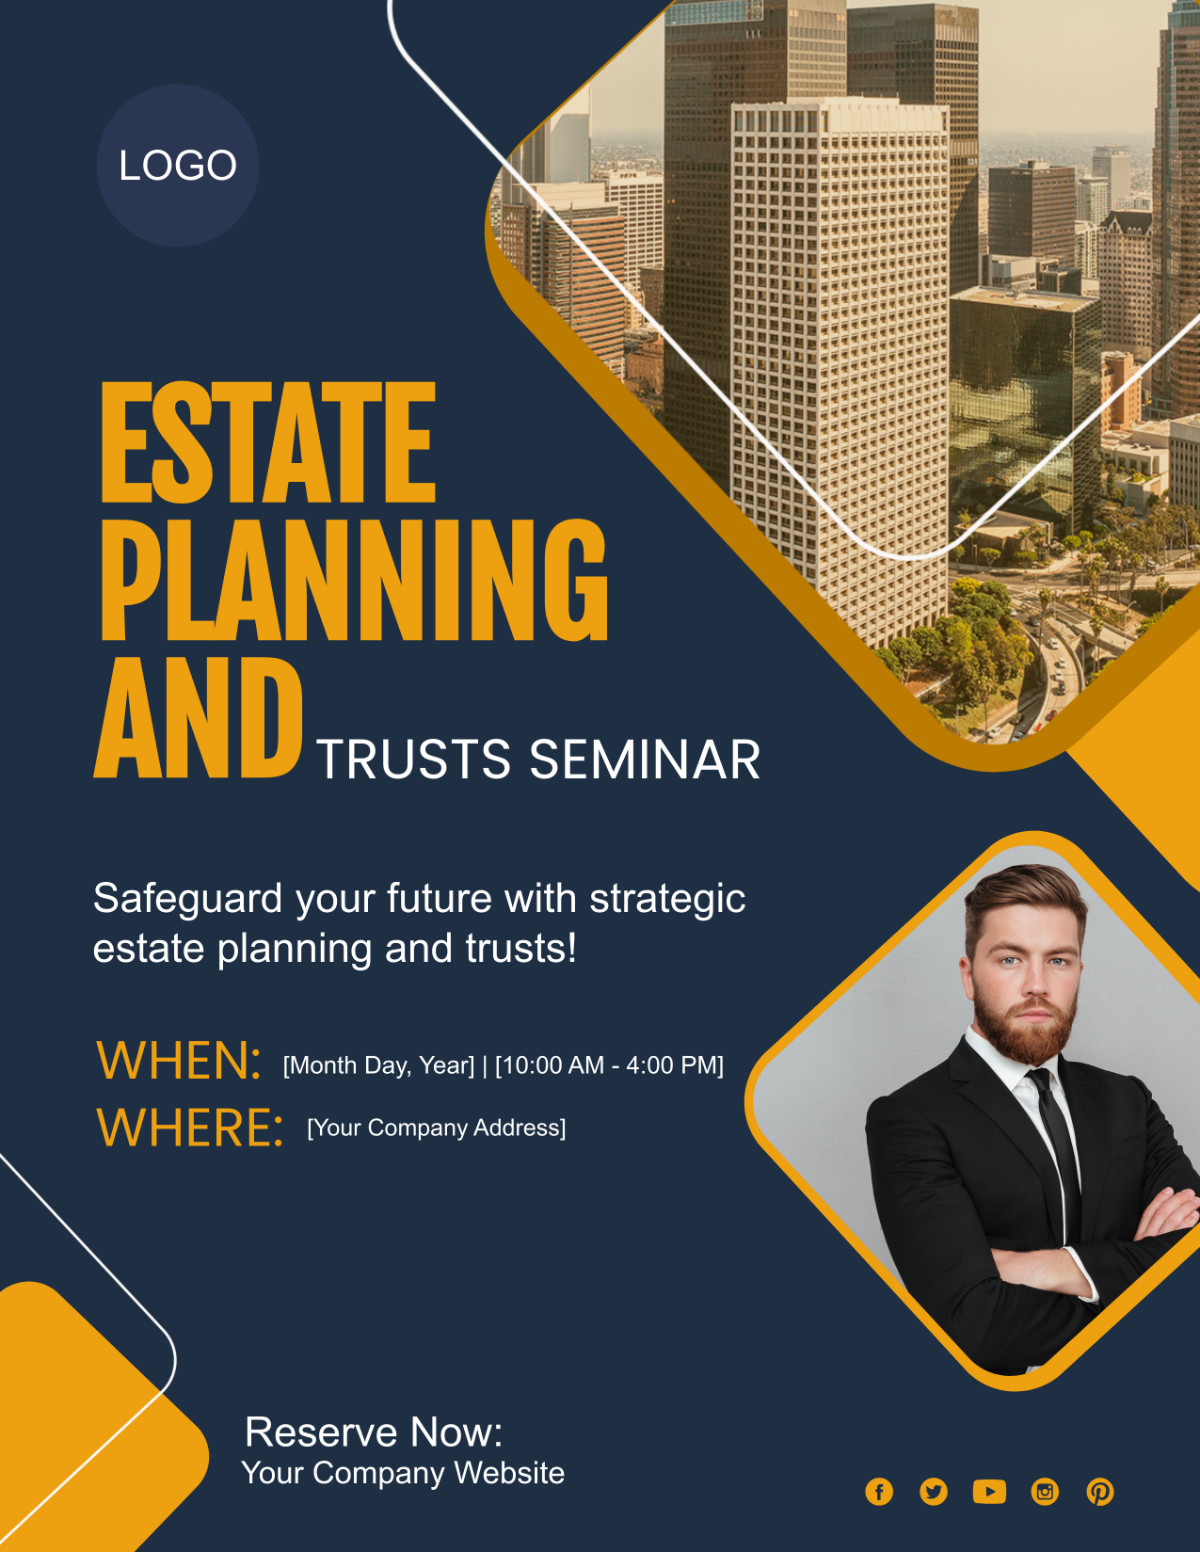 Estate Planning and Trusts Seminar Flyer Template